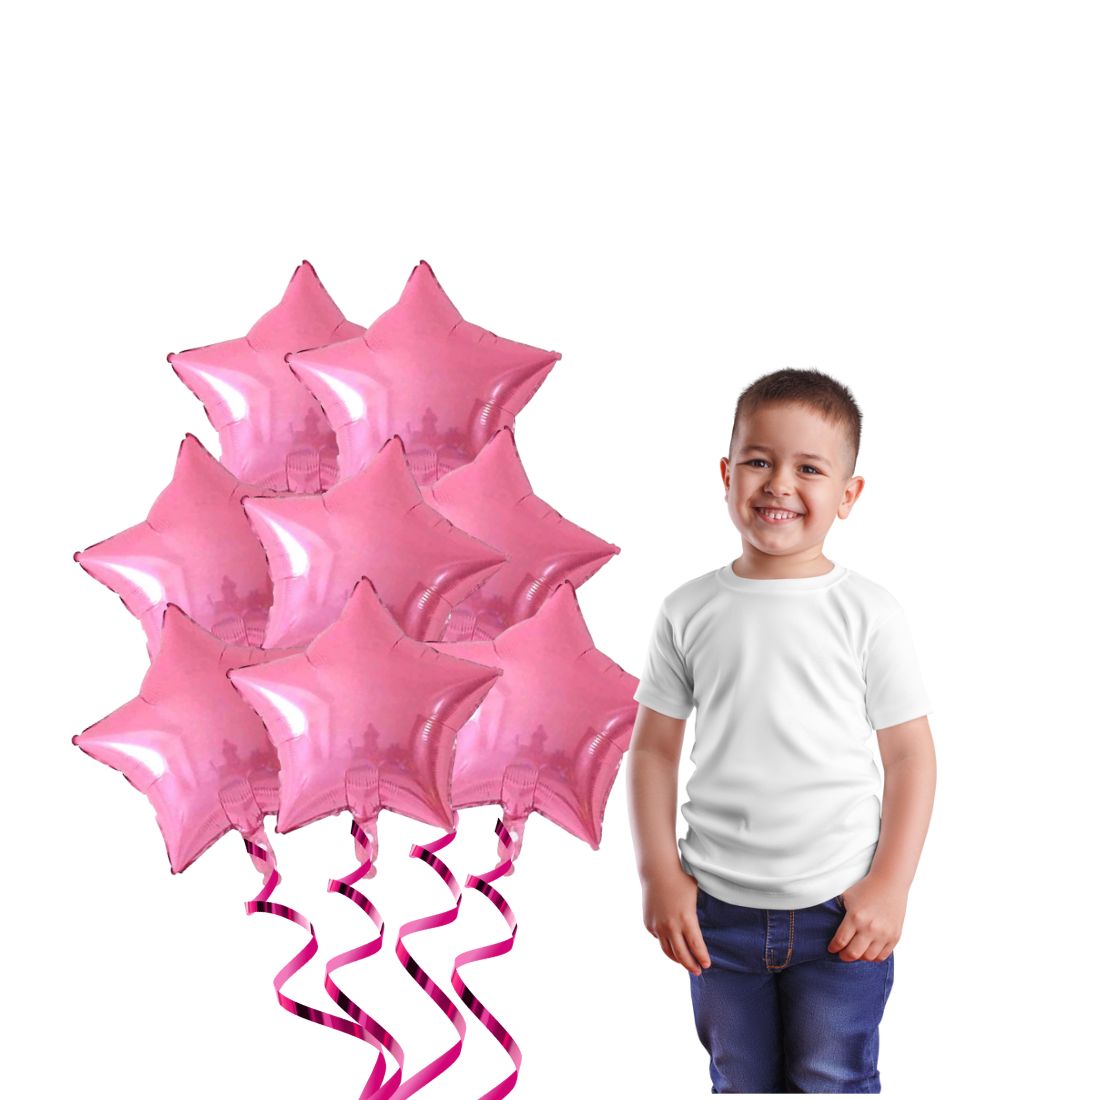 5″ Pink Star Foil Balloon for Birthday Party, Anniversary Pack of 10